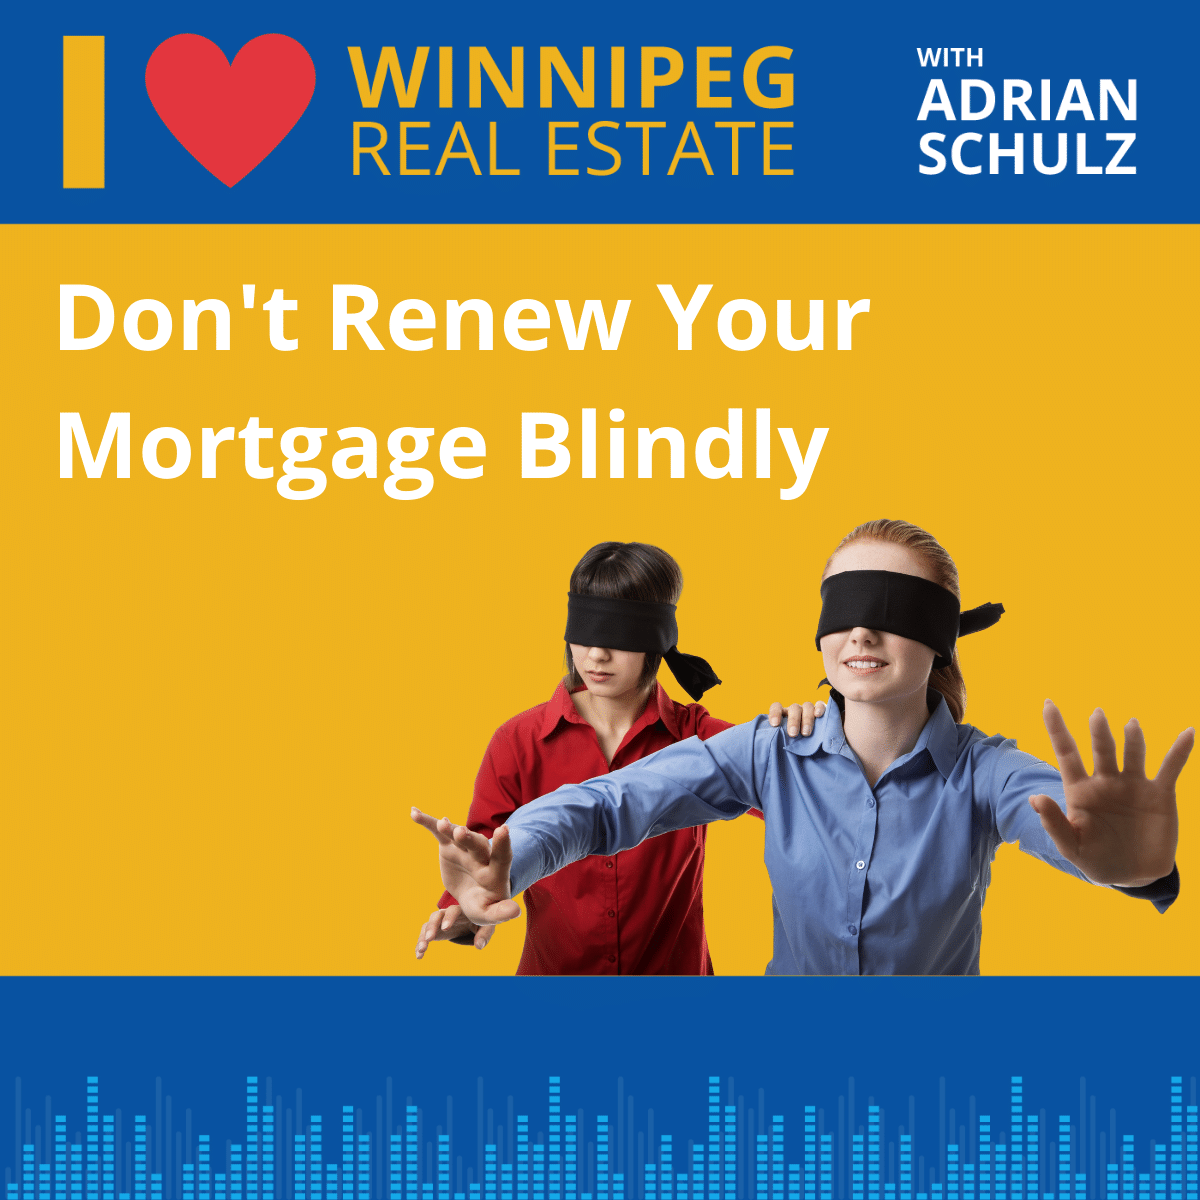 Don’t Renew Your Mortgage Blindly